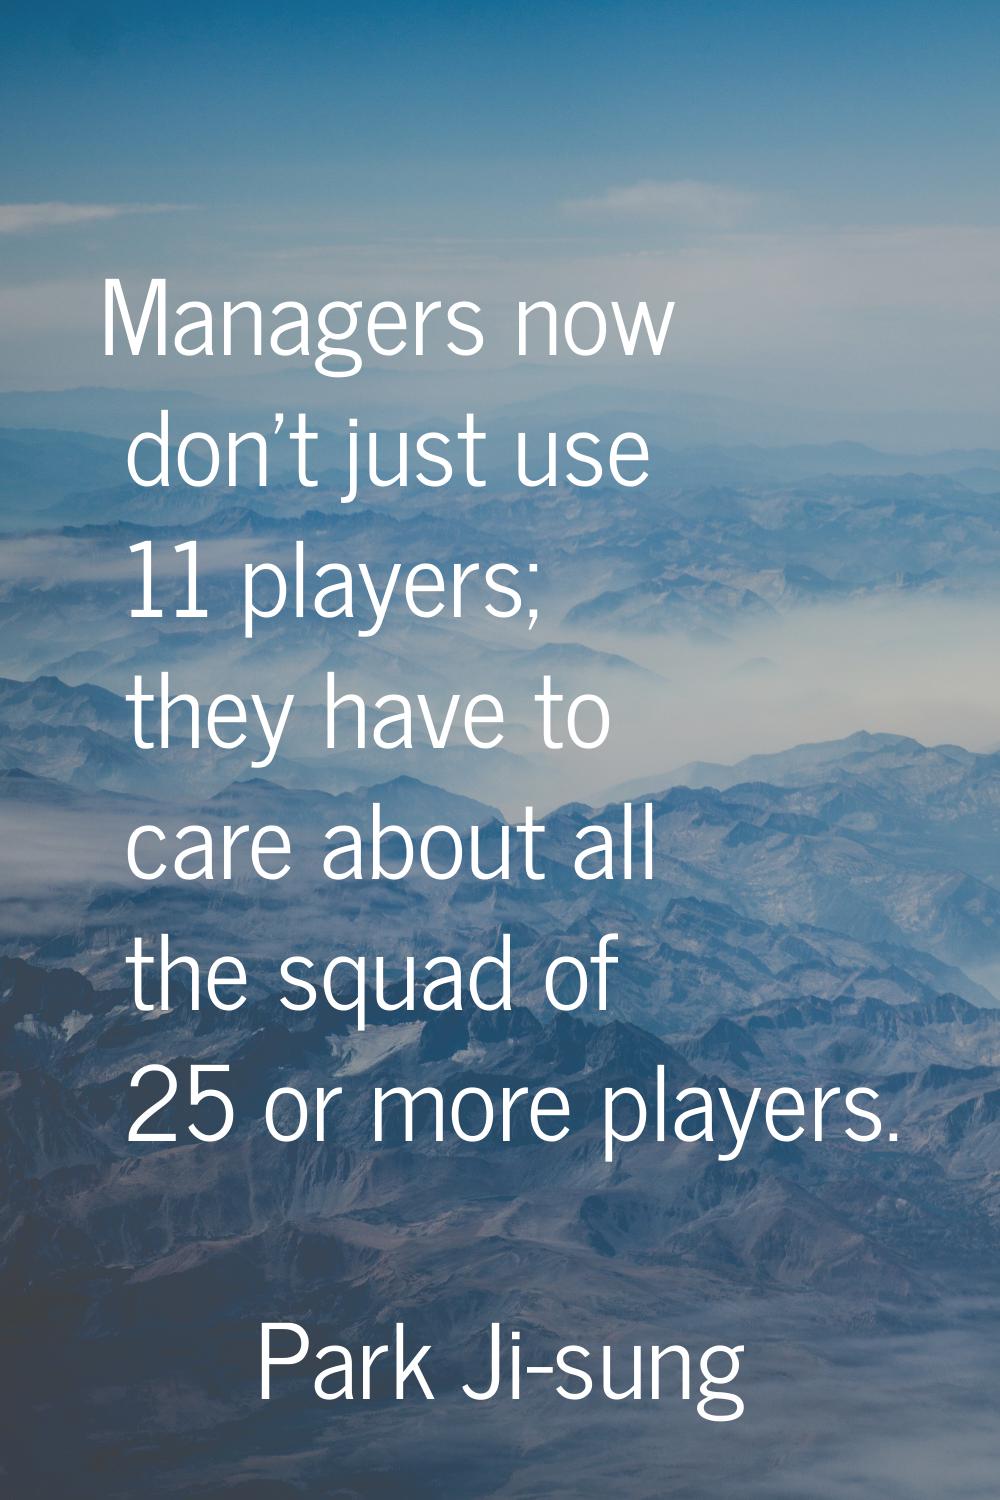 Managers now don't just use 11 players; they have to care about all the squad of 25 or more players